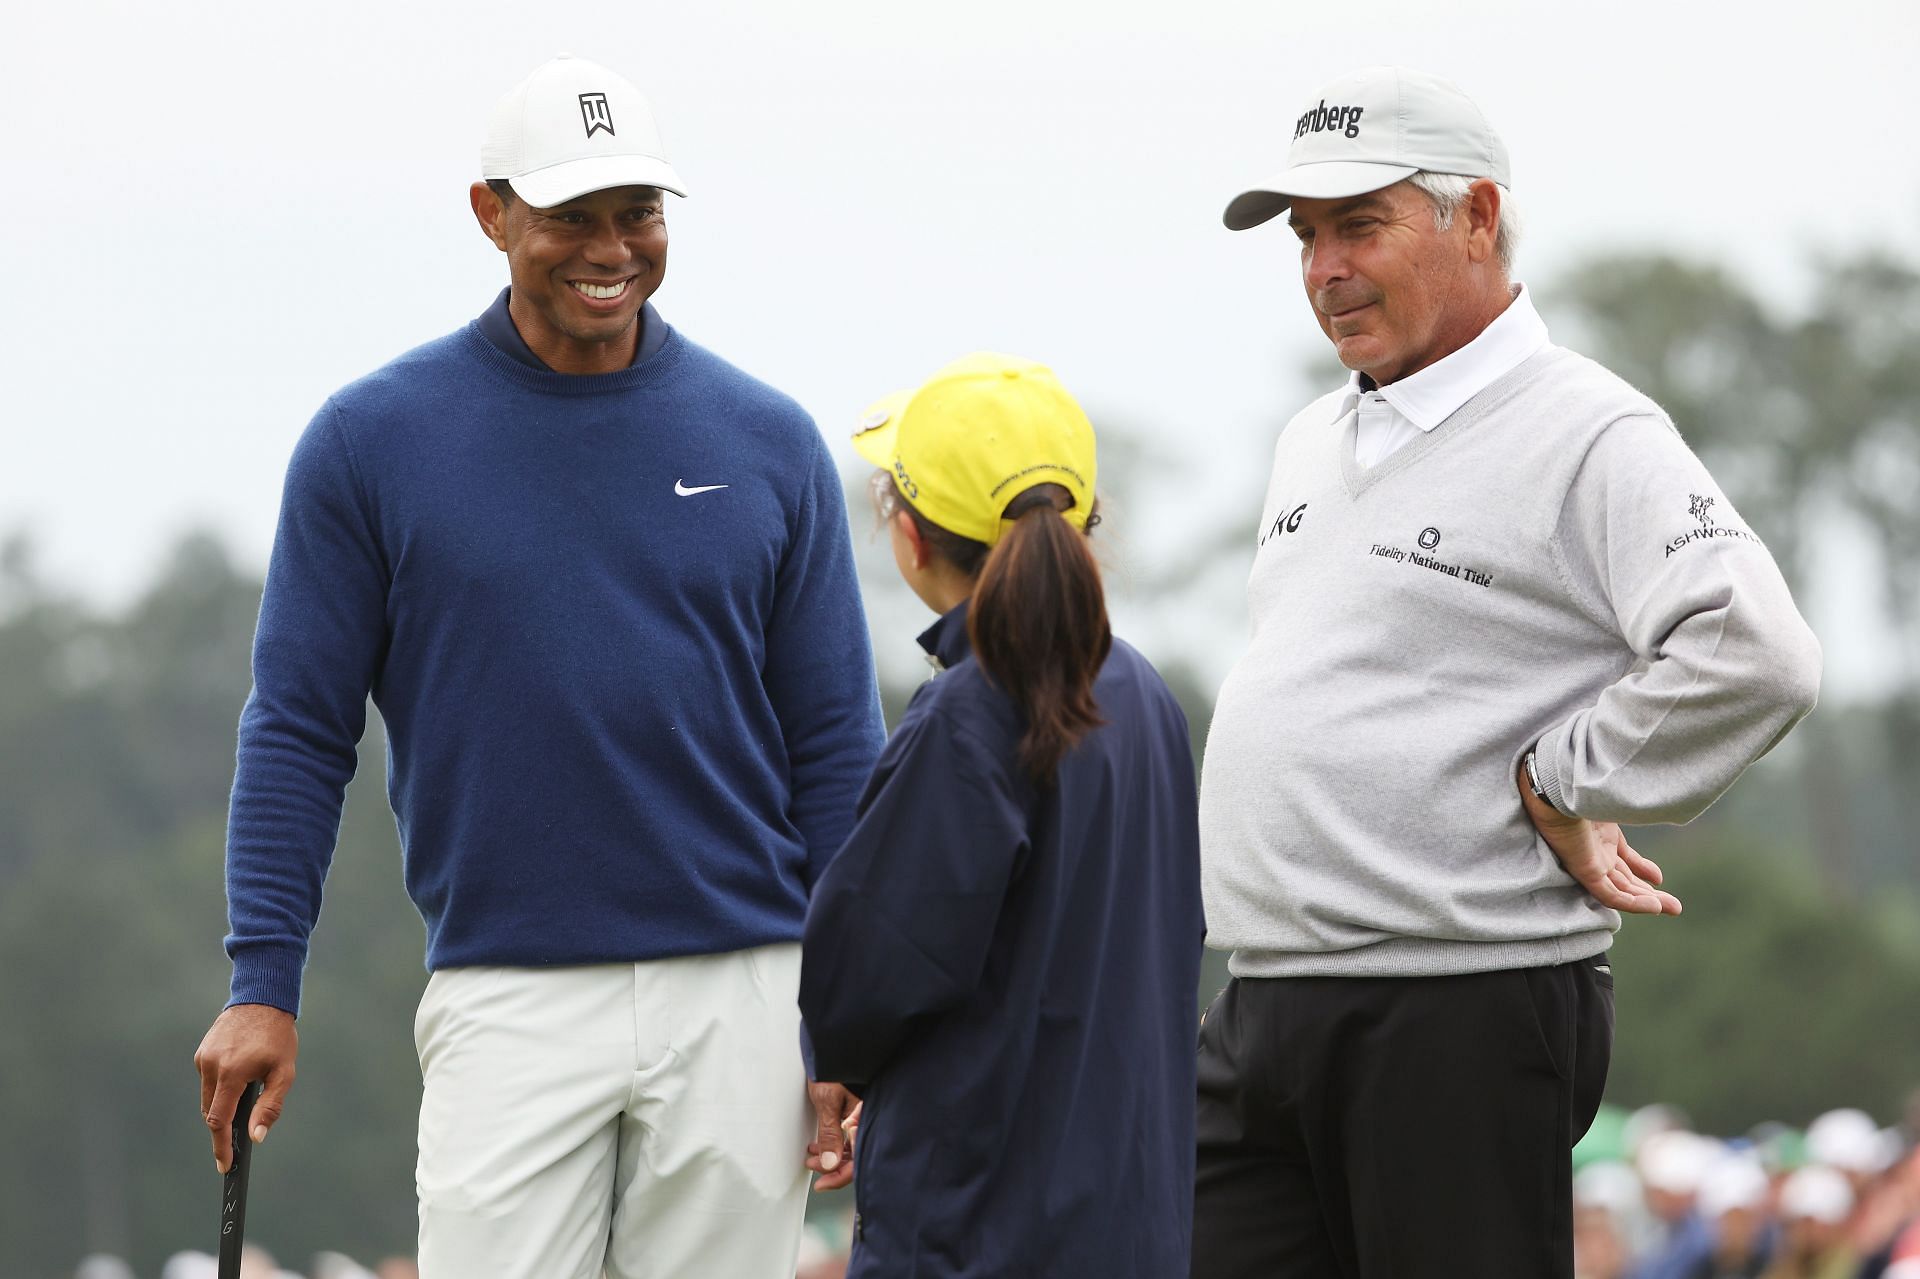 Tiger Woods of the United States and Fred Couples of the United States at the 2023 Masters Tournament at Augusta National Golf Club in Augusta, Georgia. (Photo by Christian Petersen/Getty Images)